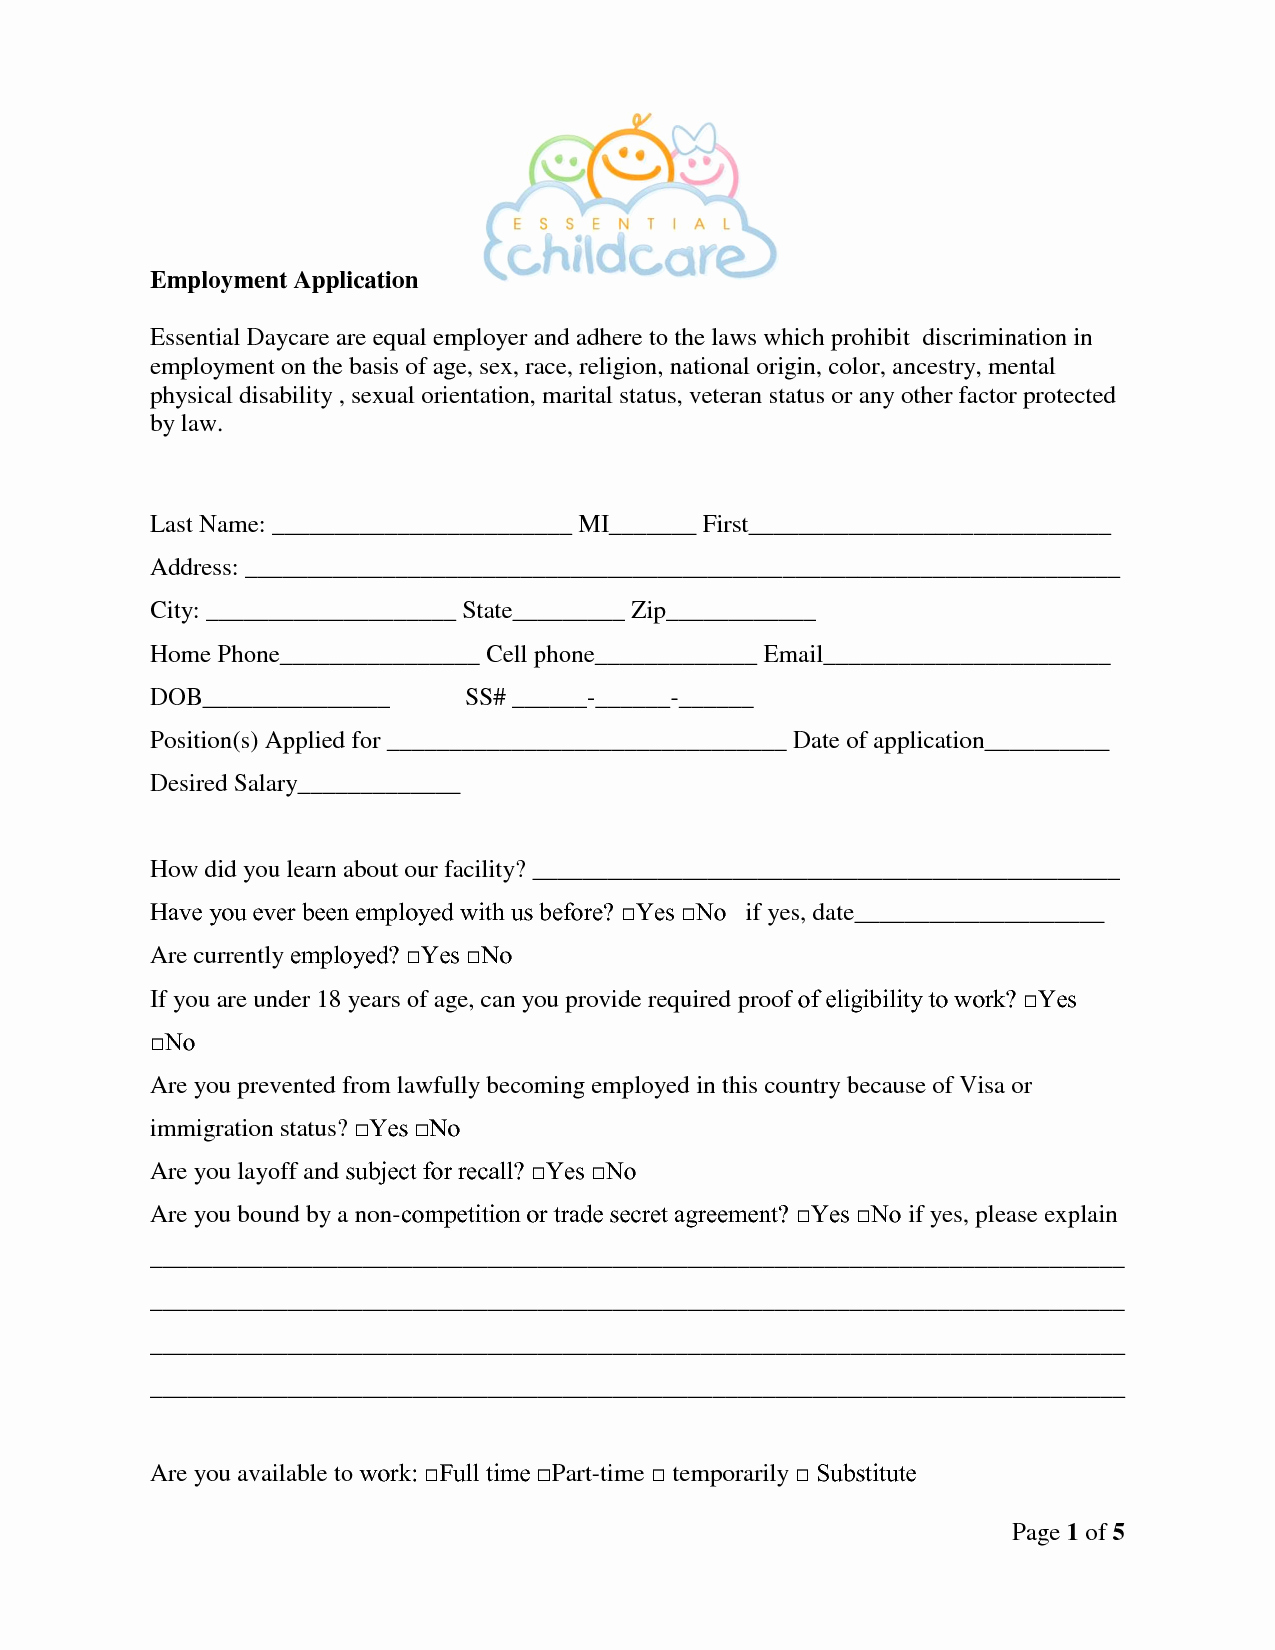 Child Care Application Template Inspirational Daycare Center Employment Application Bing